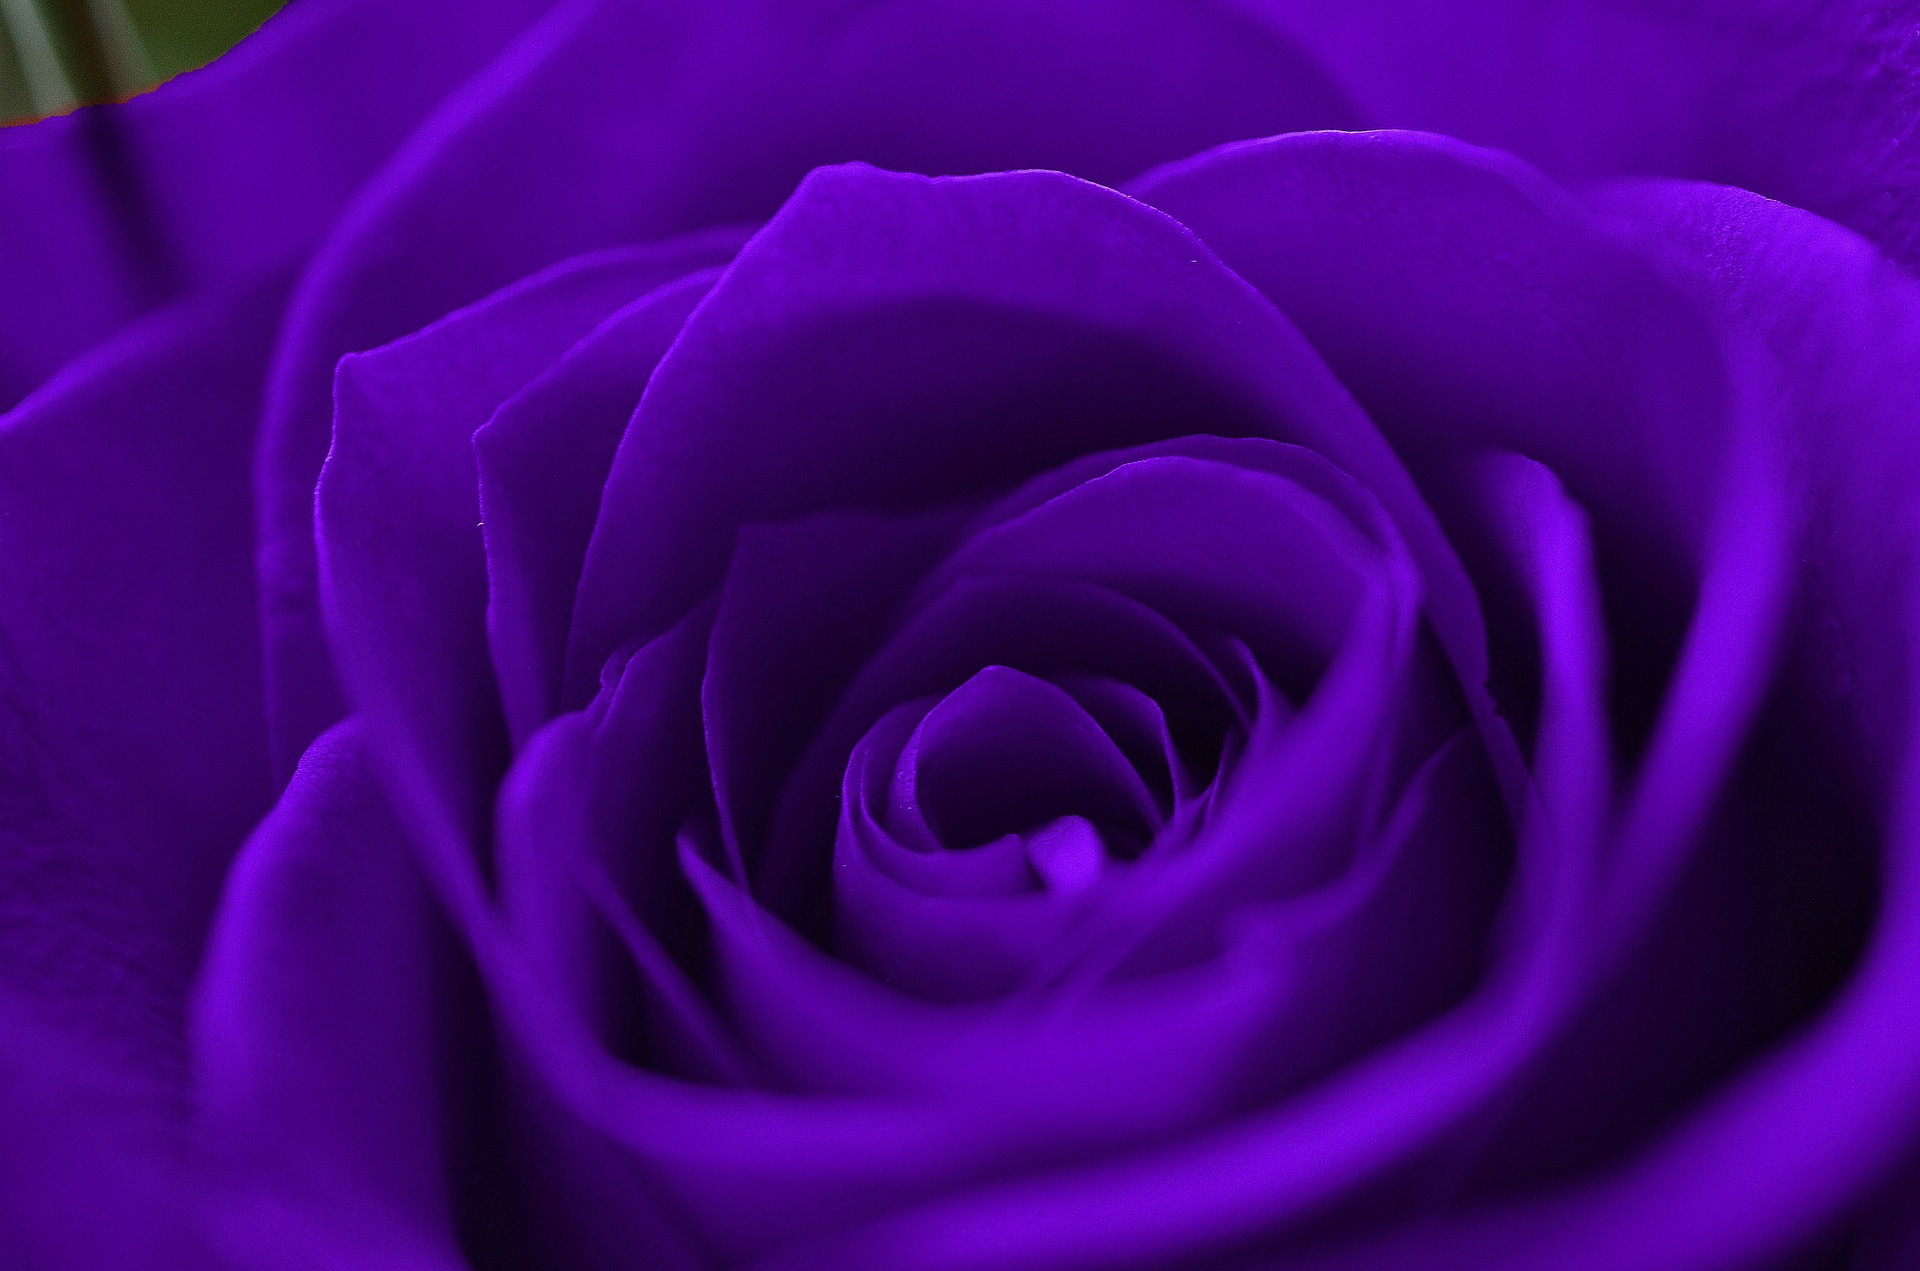 By Stephen Ments Off On Purple Rose HD Wallpaper